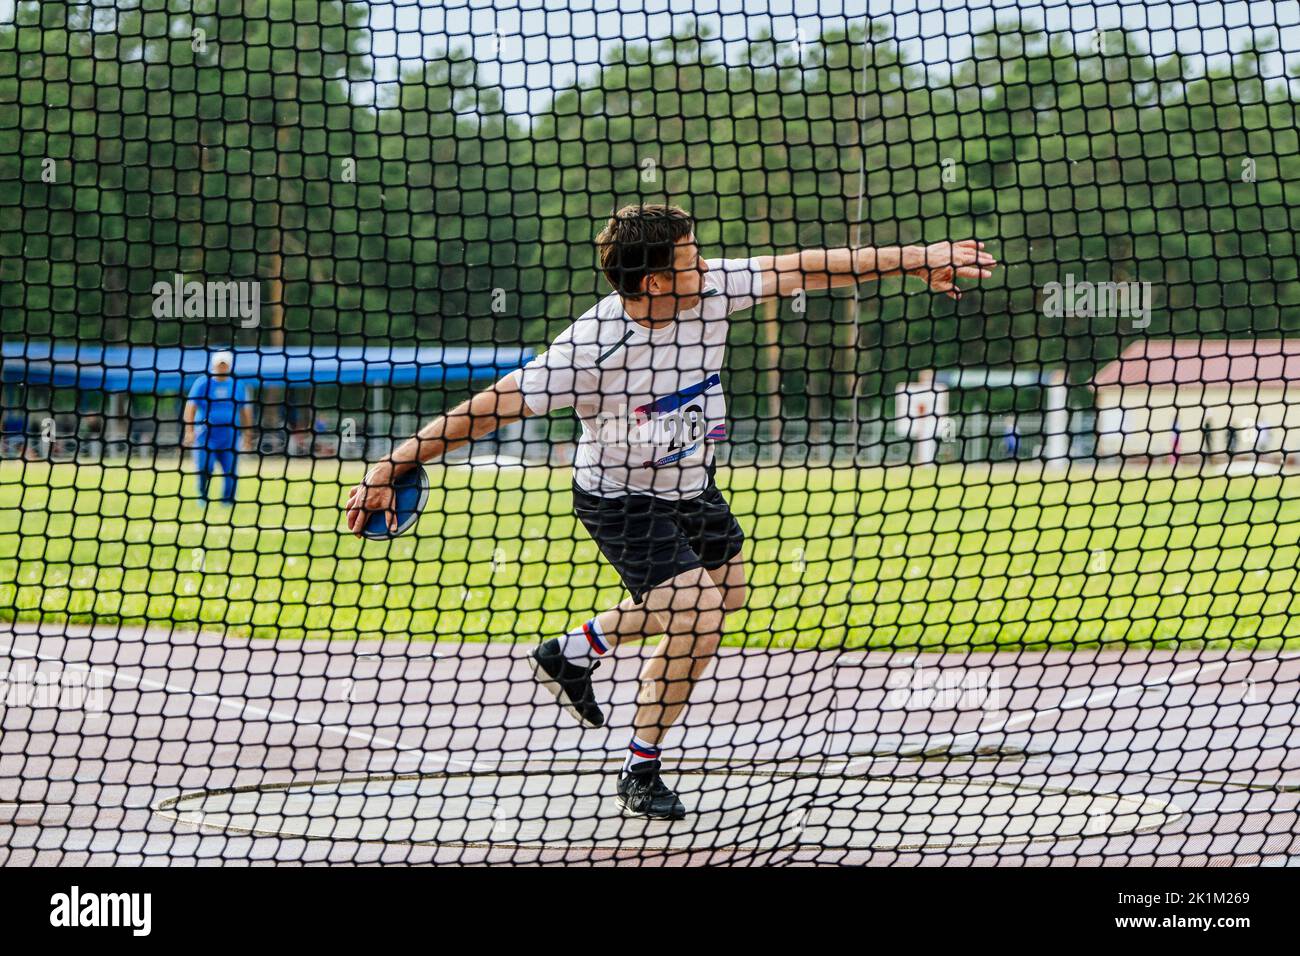 athlete thrower attempt in discus throwing Stock Photo